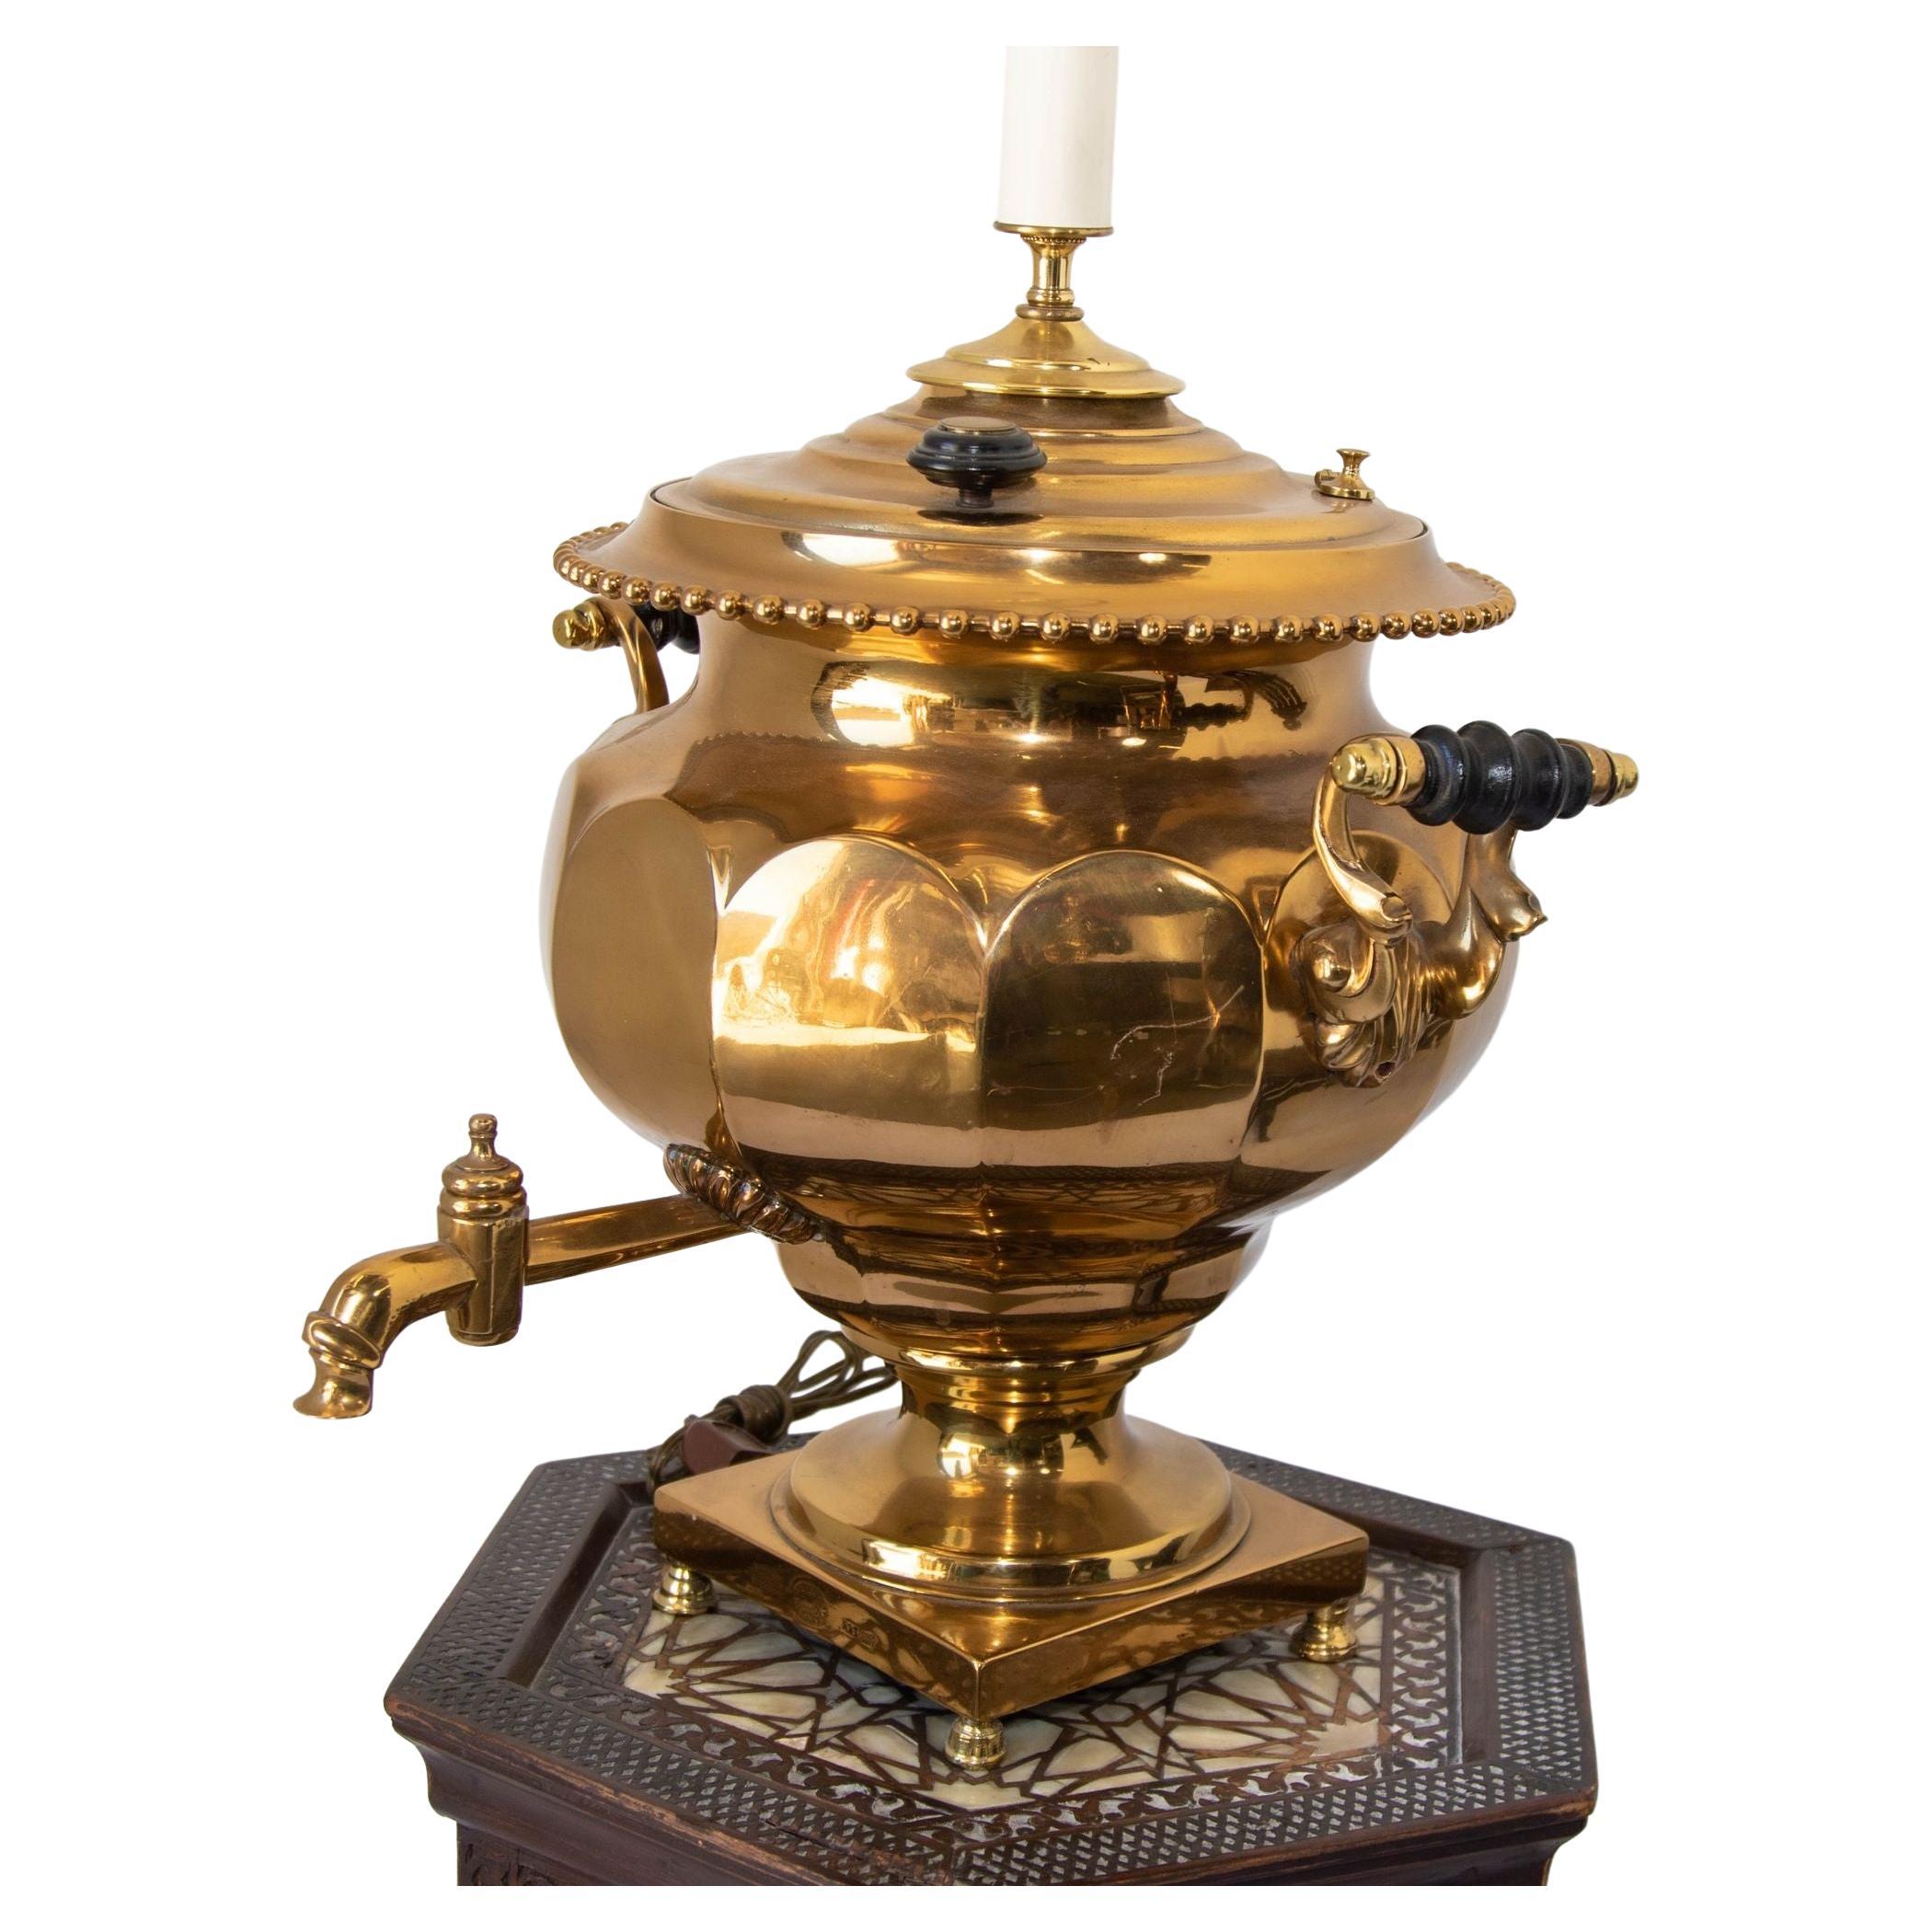 What is a samovar and how does it work? - Questions & Answers